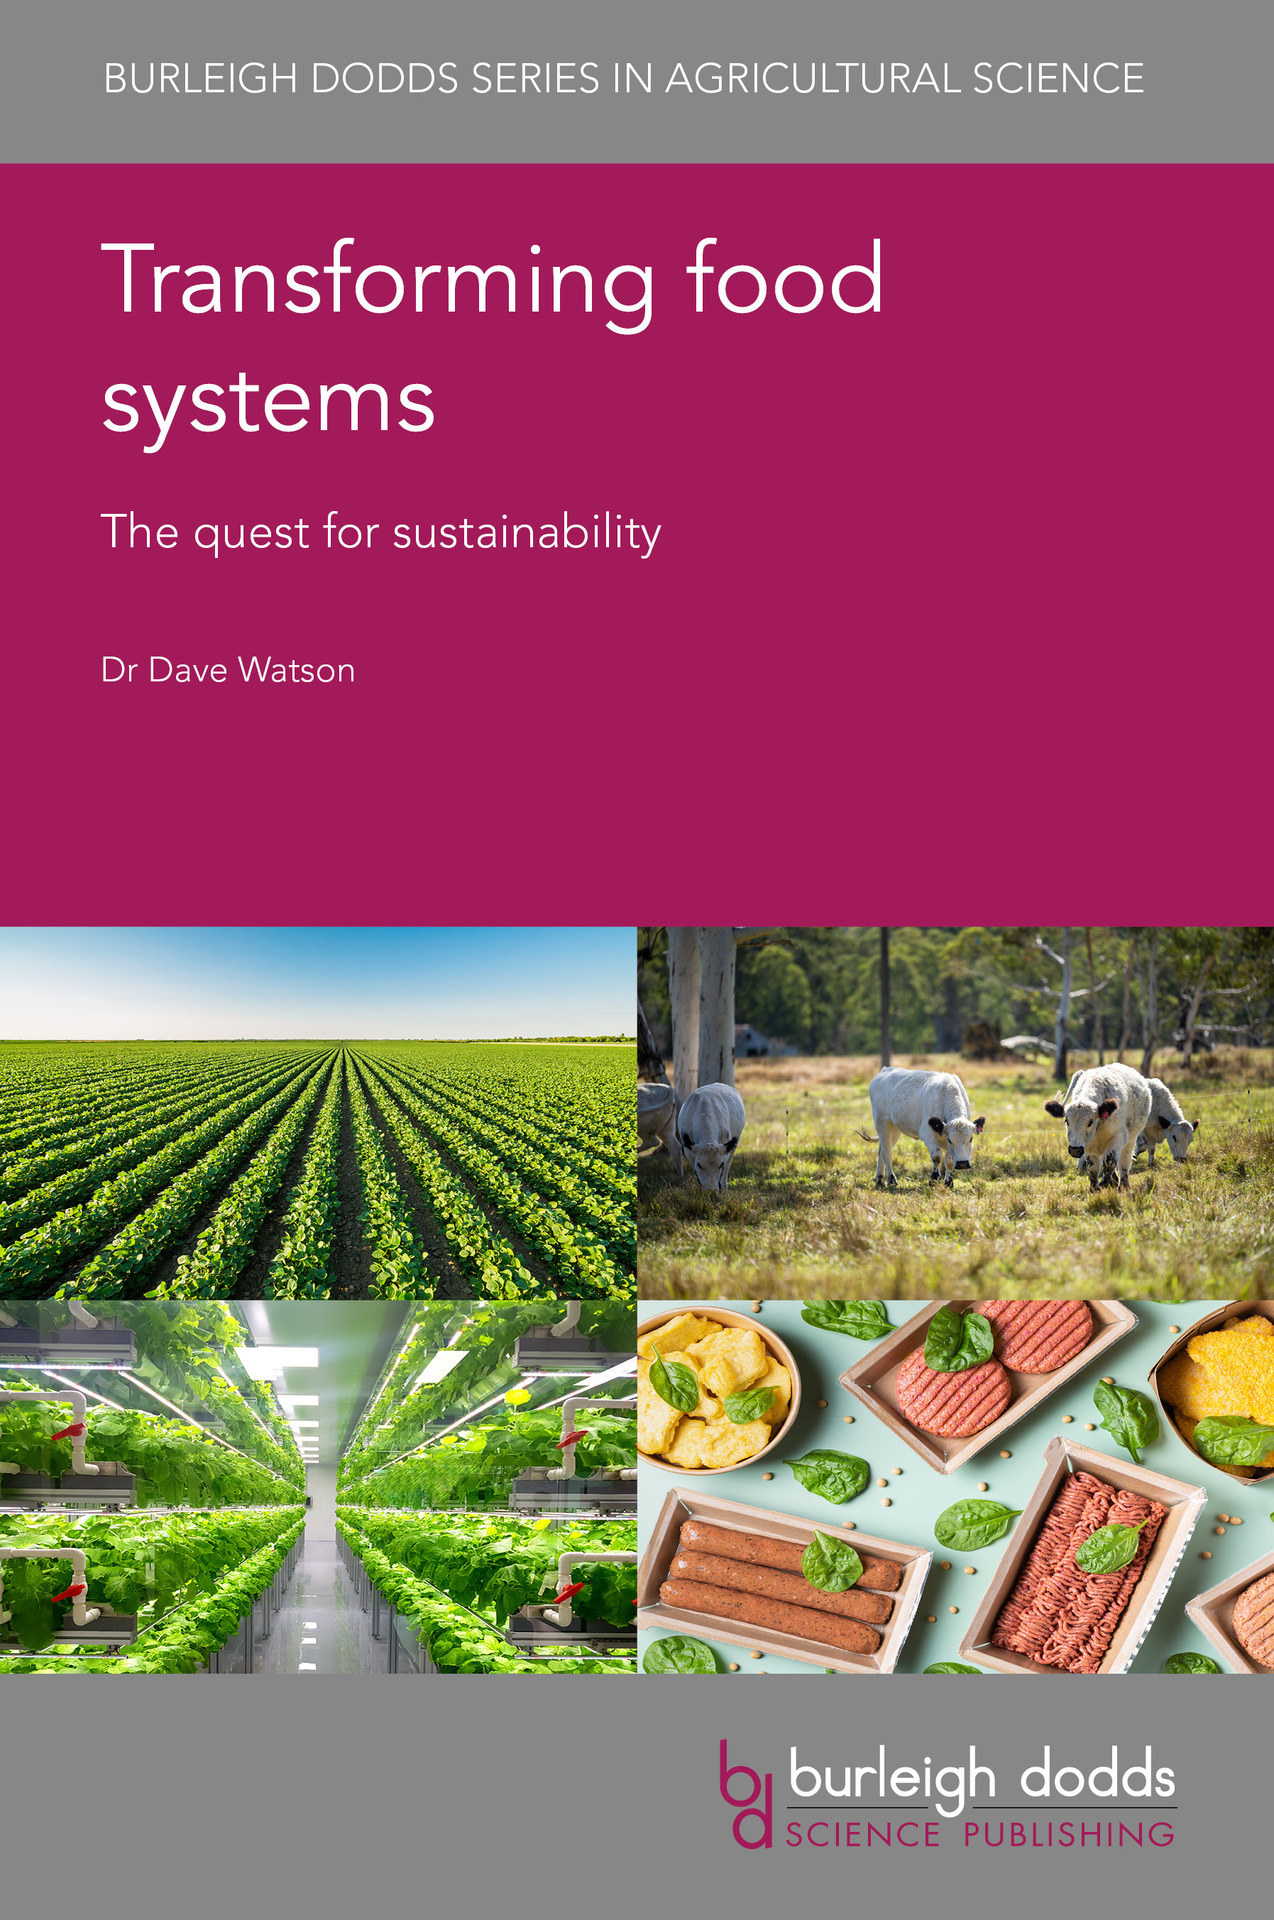 Transforming food systems - The quest for sustainability